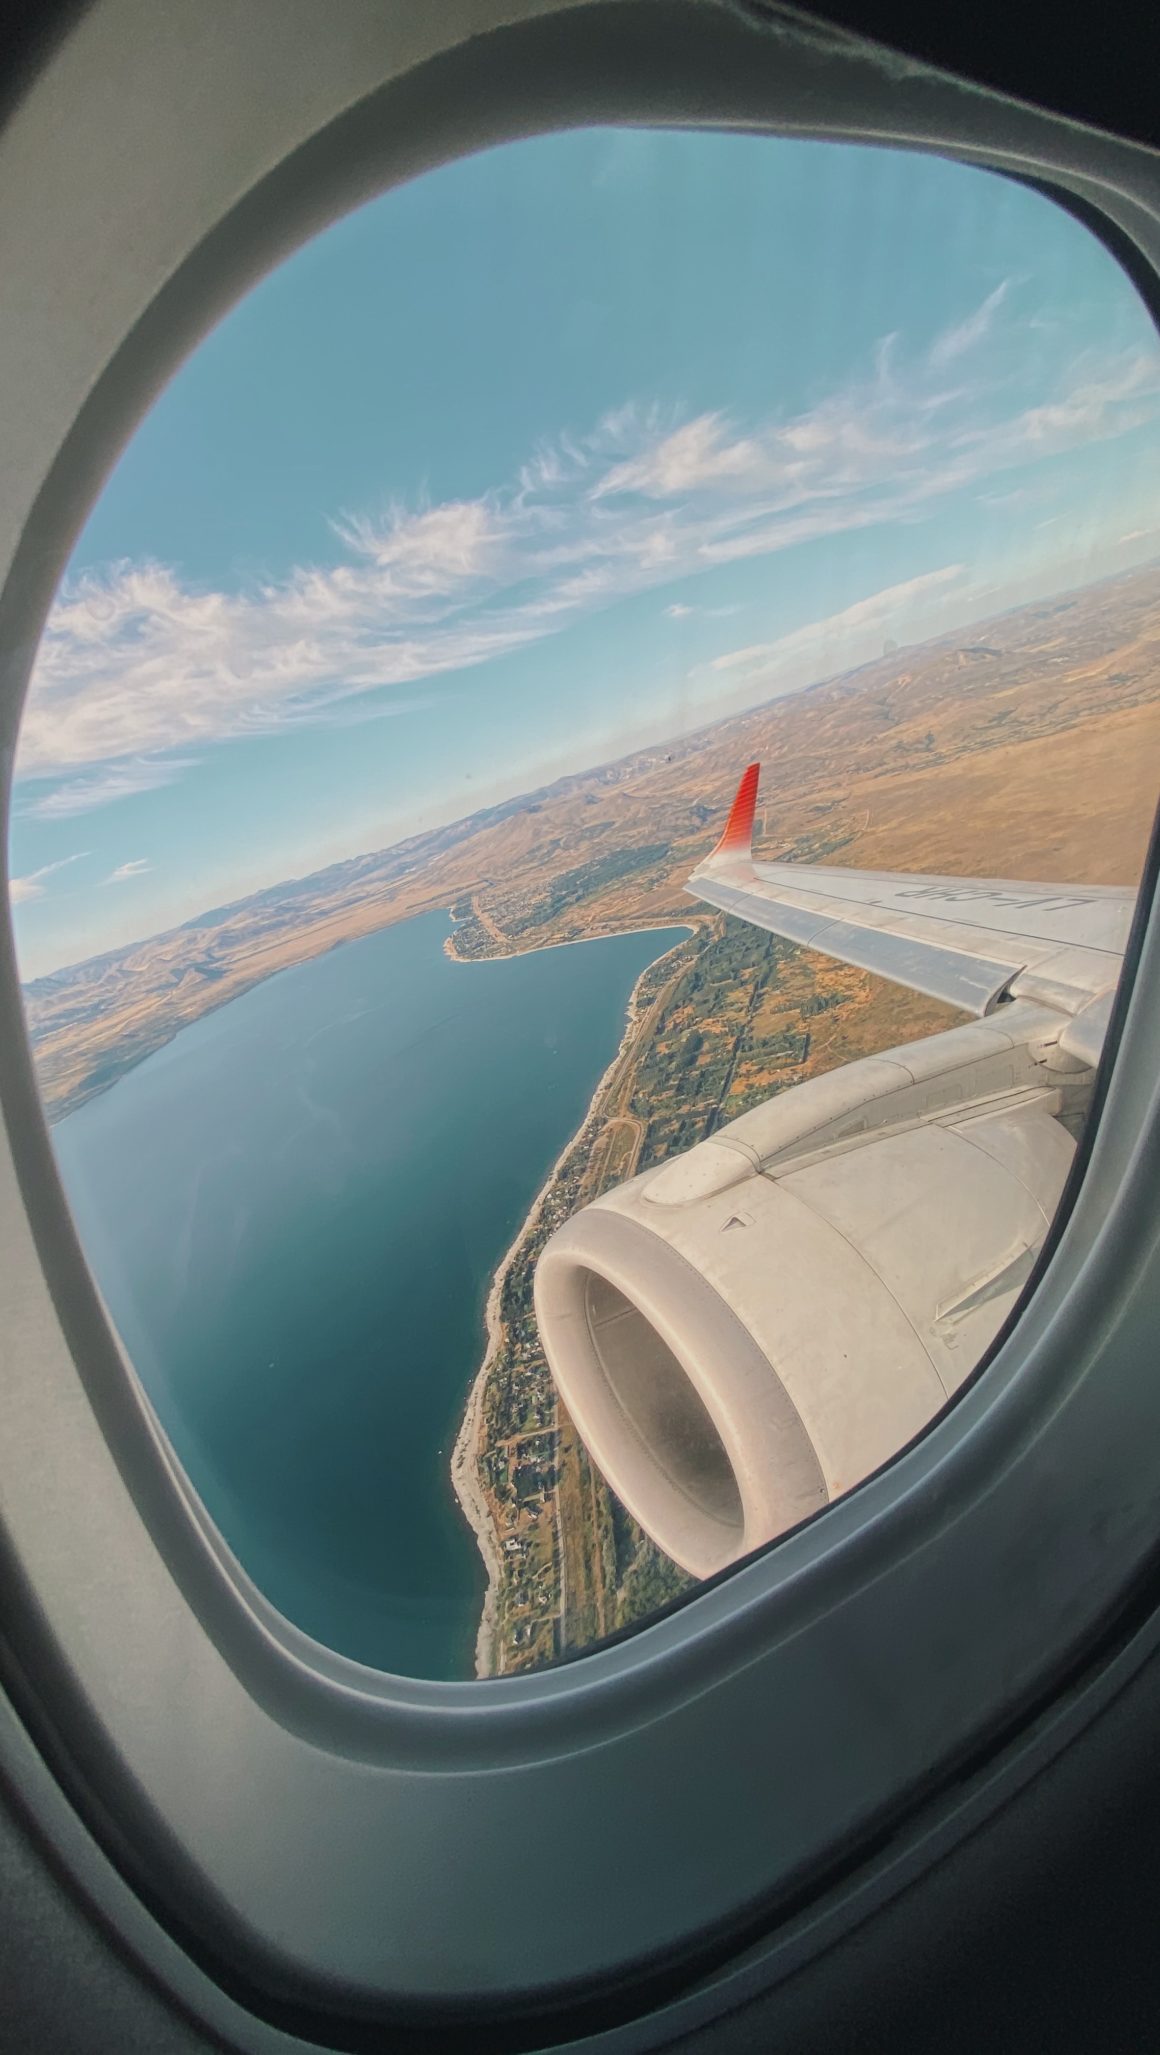 See Views from the window of an airplane